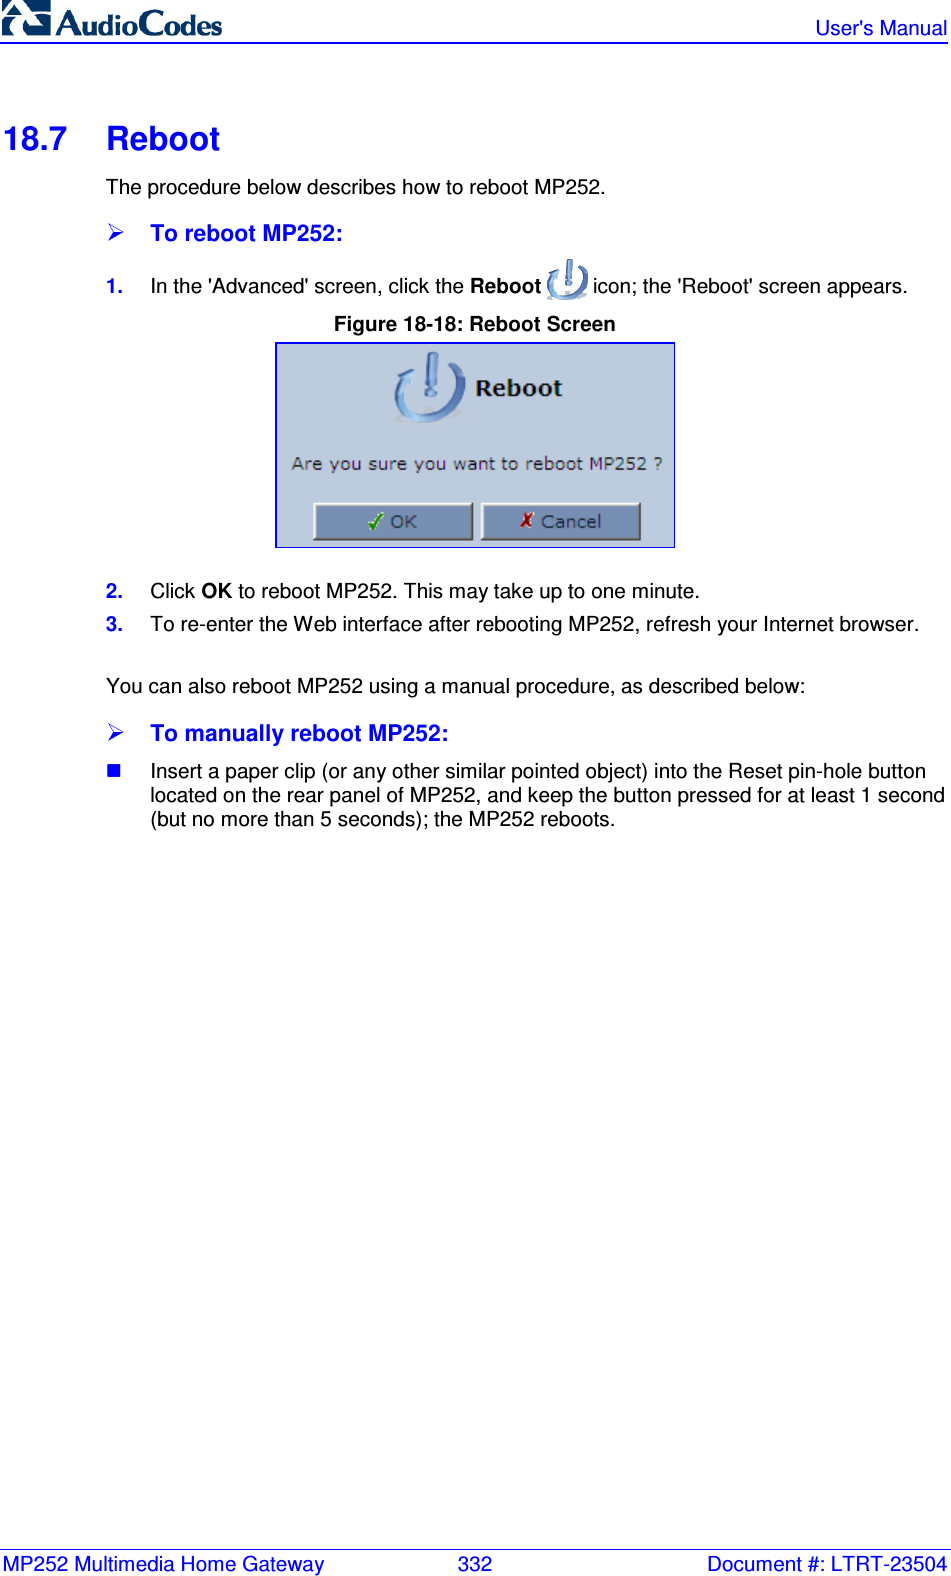 MP252 Multimedia Home Gateway  332  Document #: LTRT-23504   User&apos;s Manual  18.7  Reboot The procedure below describes how to reboot MP252.  To reboot MP252: 1.  In the &apos;Advanced&apos; screen, click the Reboot   icon; the &apos;Reboot&apos; screen appears. Figure 18-18: Reboot Screen  2.  Click OK to reboot MP252. This may take up to one minute. 3.  To re-enter the Web interface after rebooting MP252, refresh your Internet browser.  You can also reboot MP252 using a manual procedure, as described below:  To manually reboot MP252:  Insert a paper clip (or any other similar pointed object) into the Reset pin-hole button located on the rear panel of MP252, and keep the button pressed for at least 1 second (but no more than 5 seconds); the MP252 reboots.  